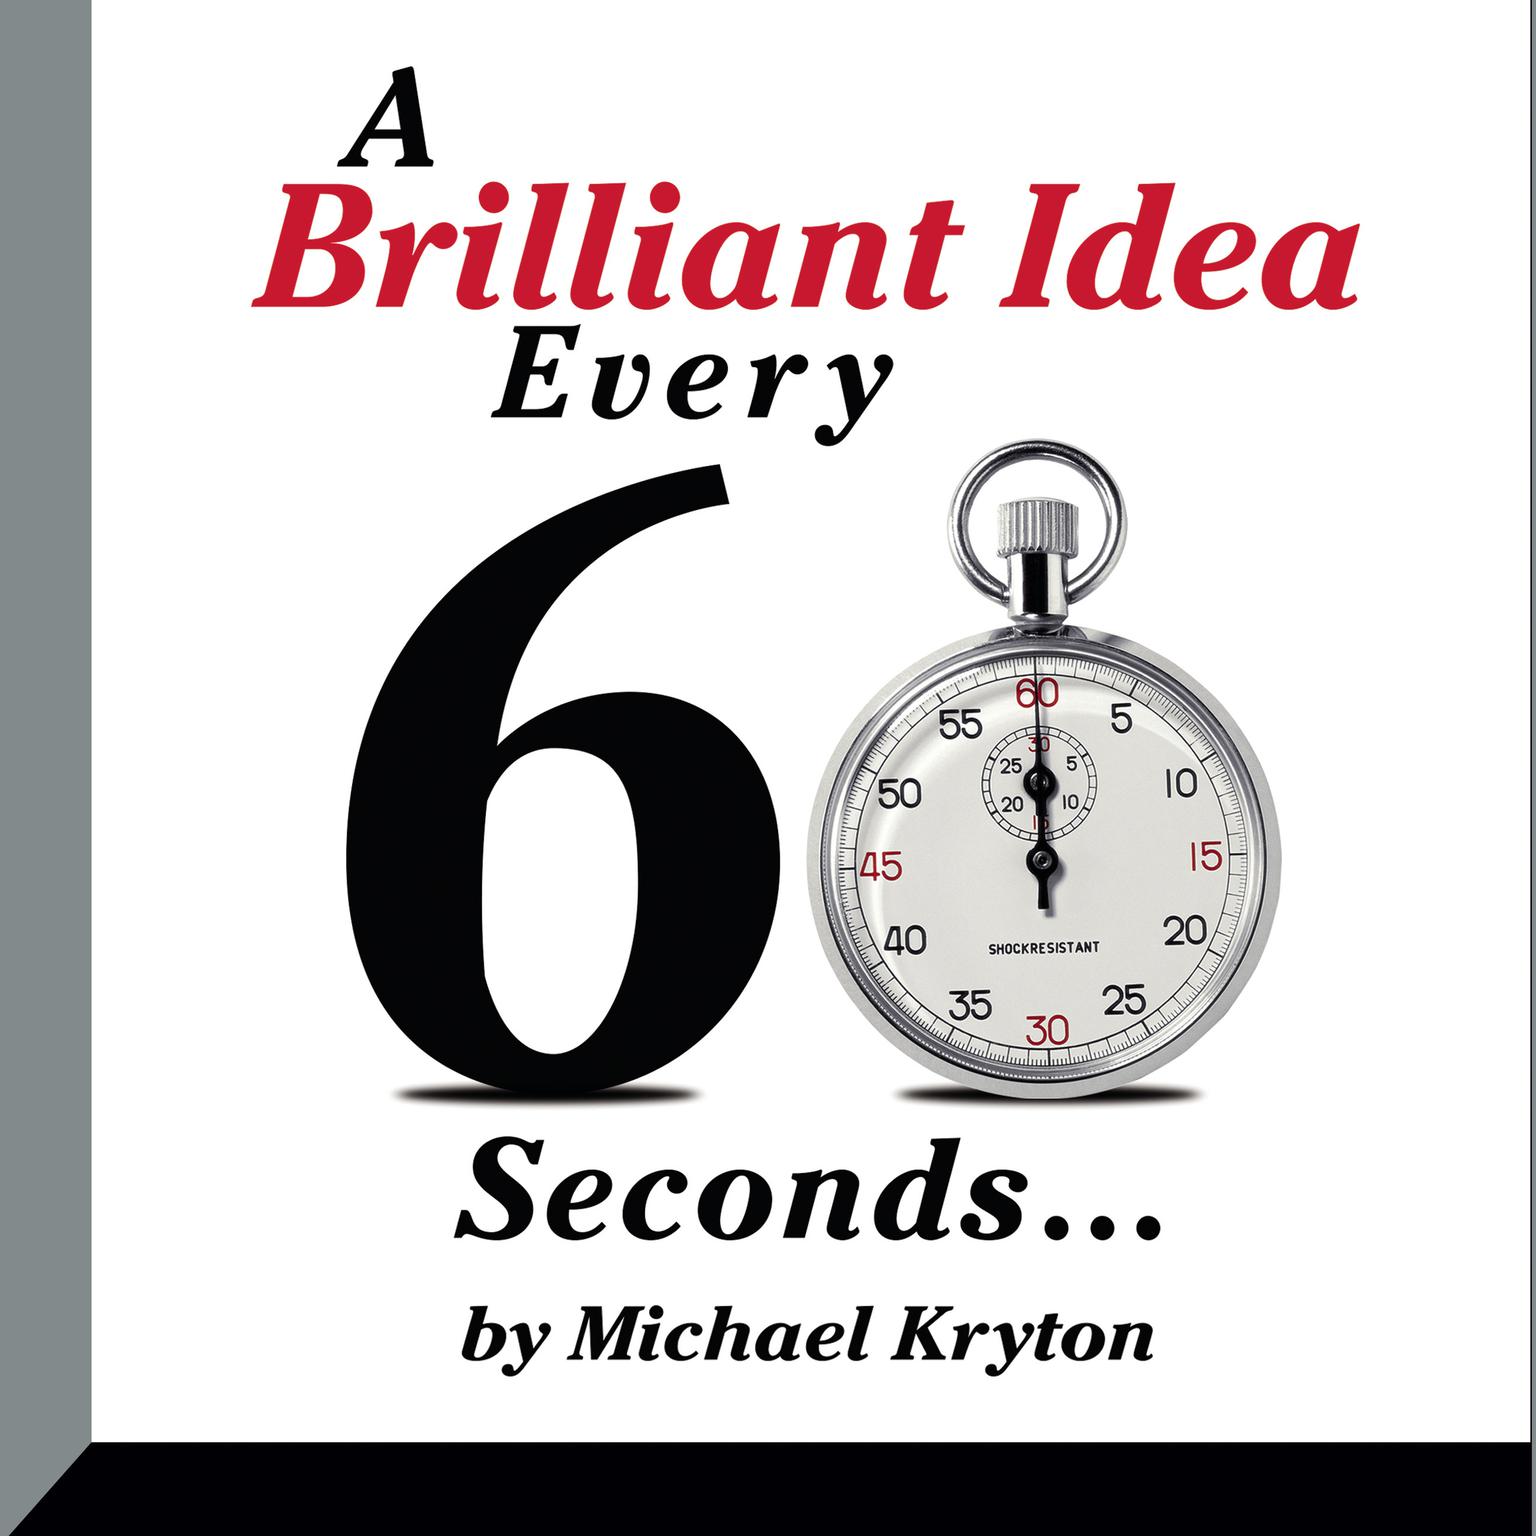 A Brilliant Idea Every 60 Seconds Audiobook, by Michael Kryton